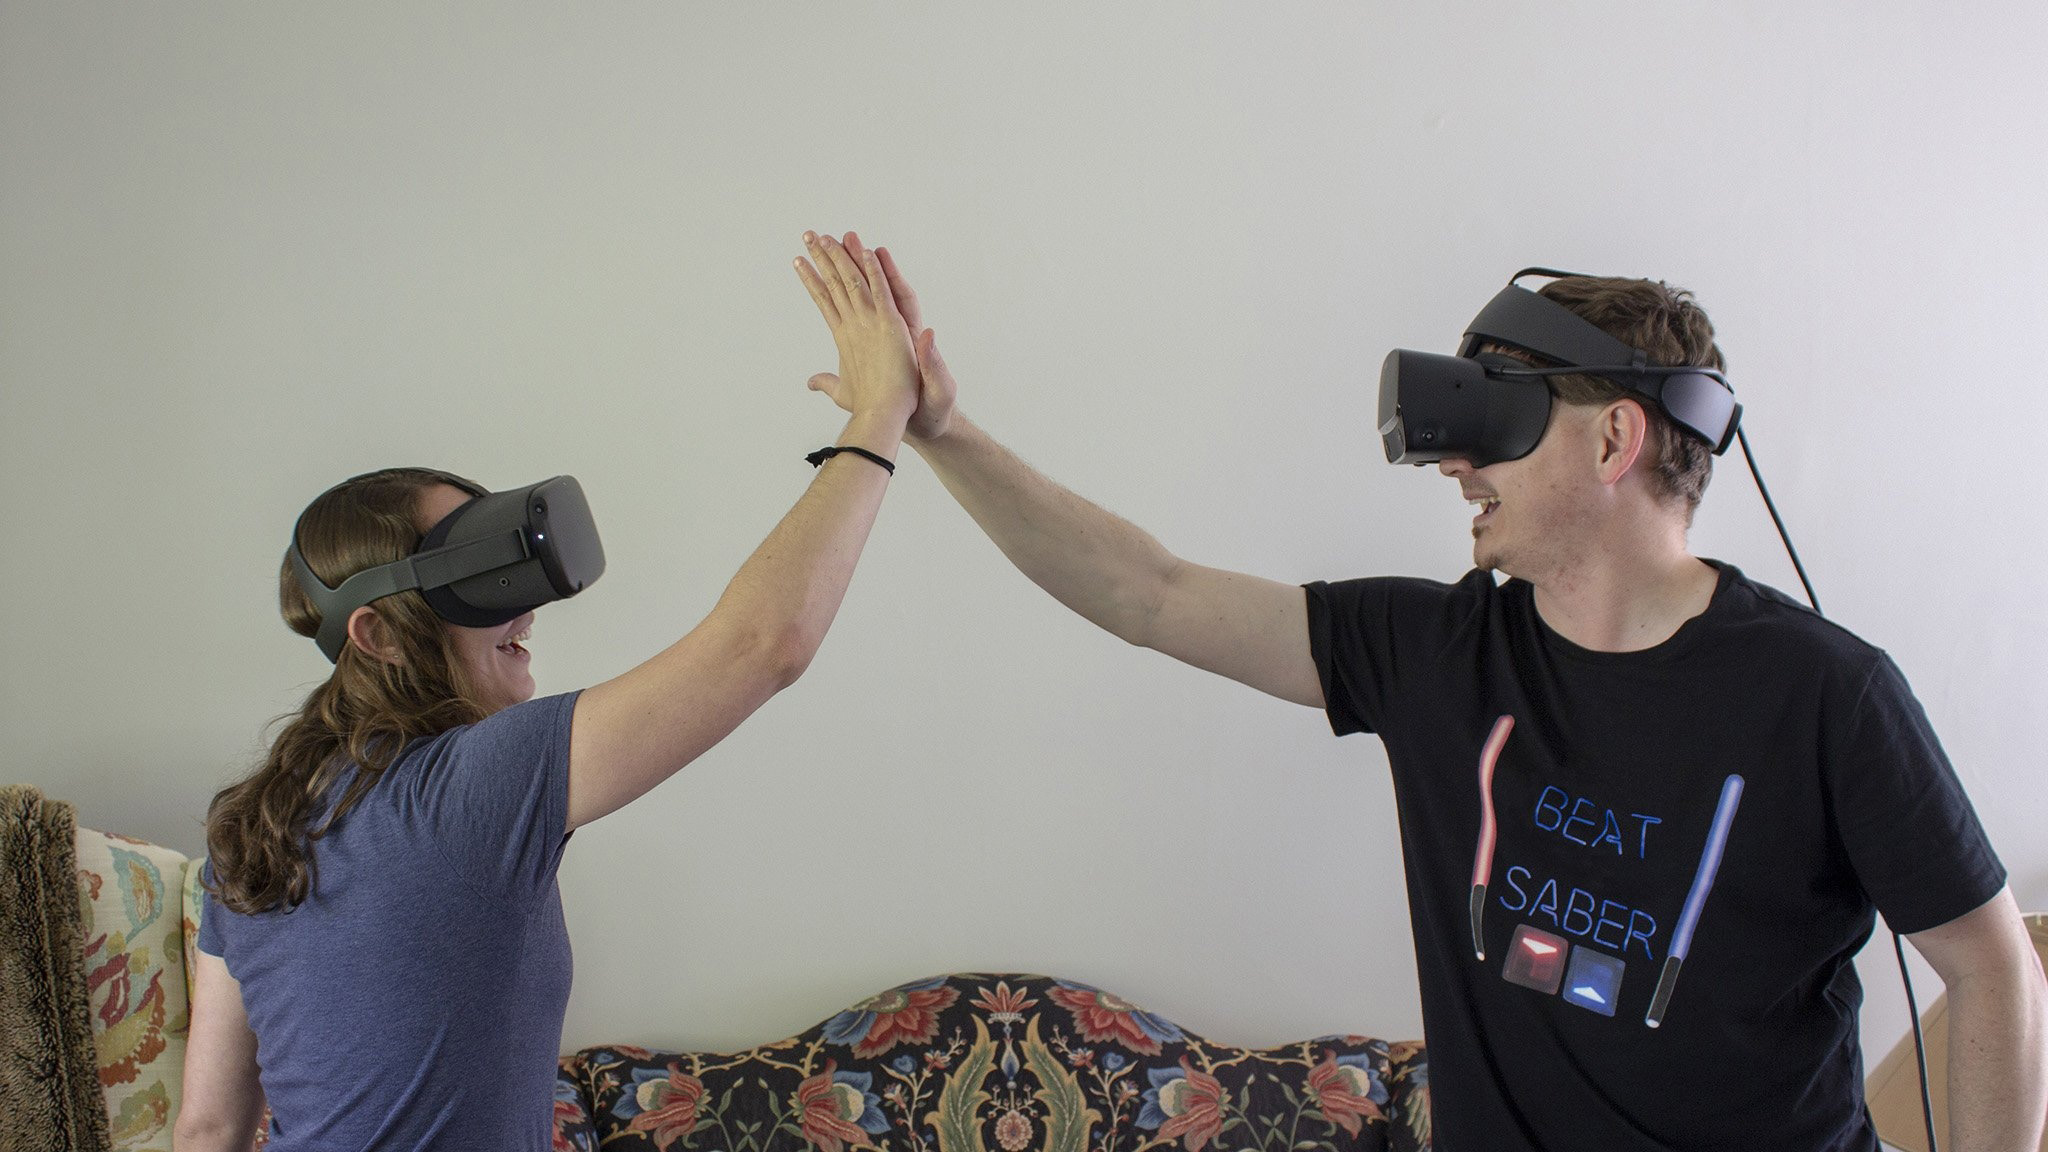 Two VR players fool each other while wearing Oculus Quest and Rift S glasses.